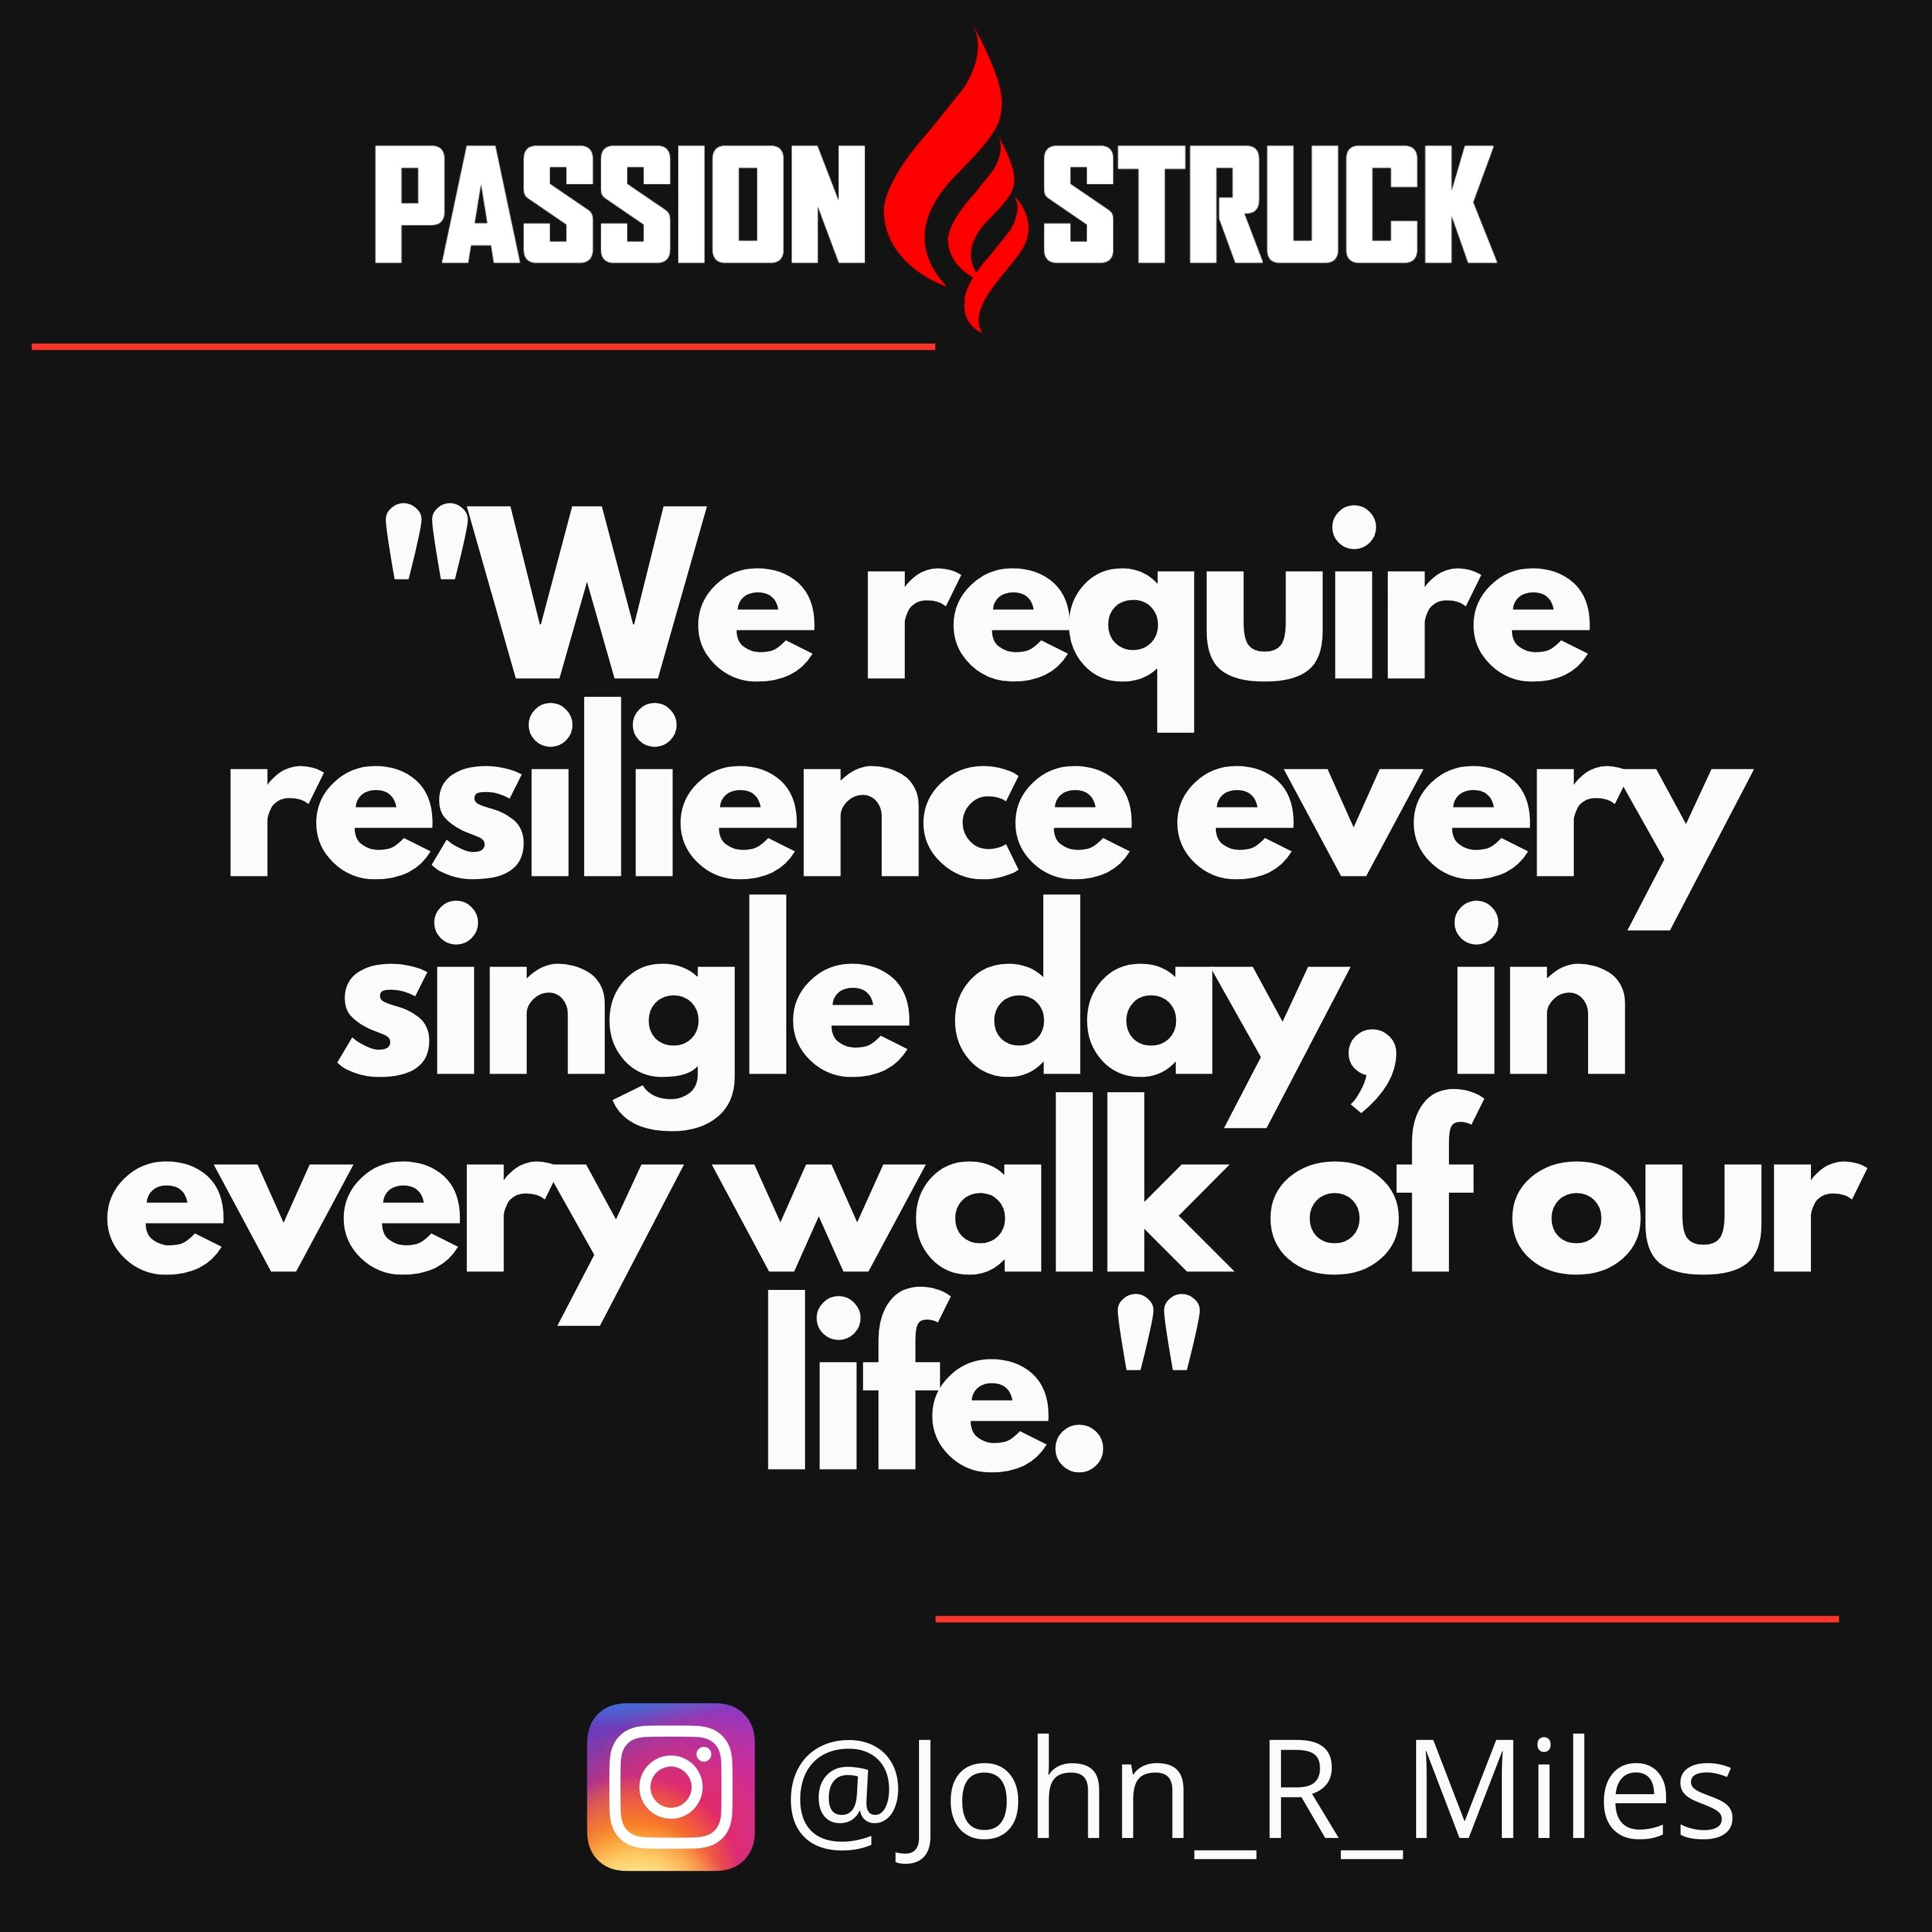 quote by John R. Miles on how to build resilience